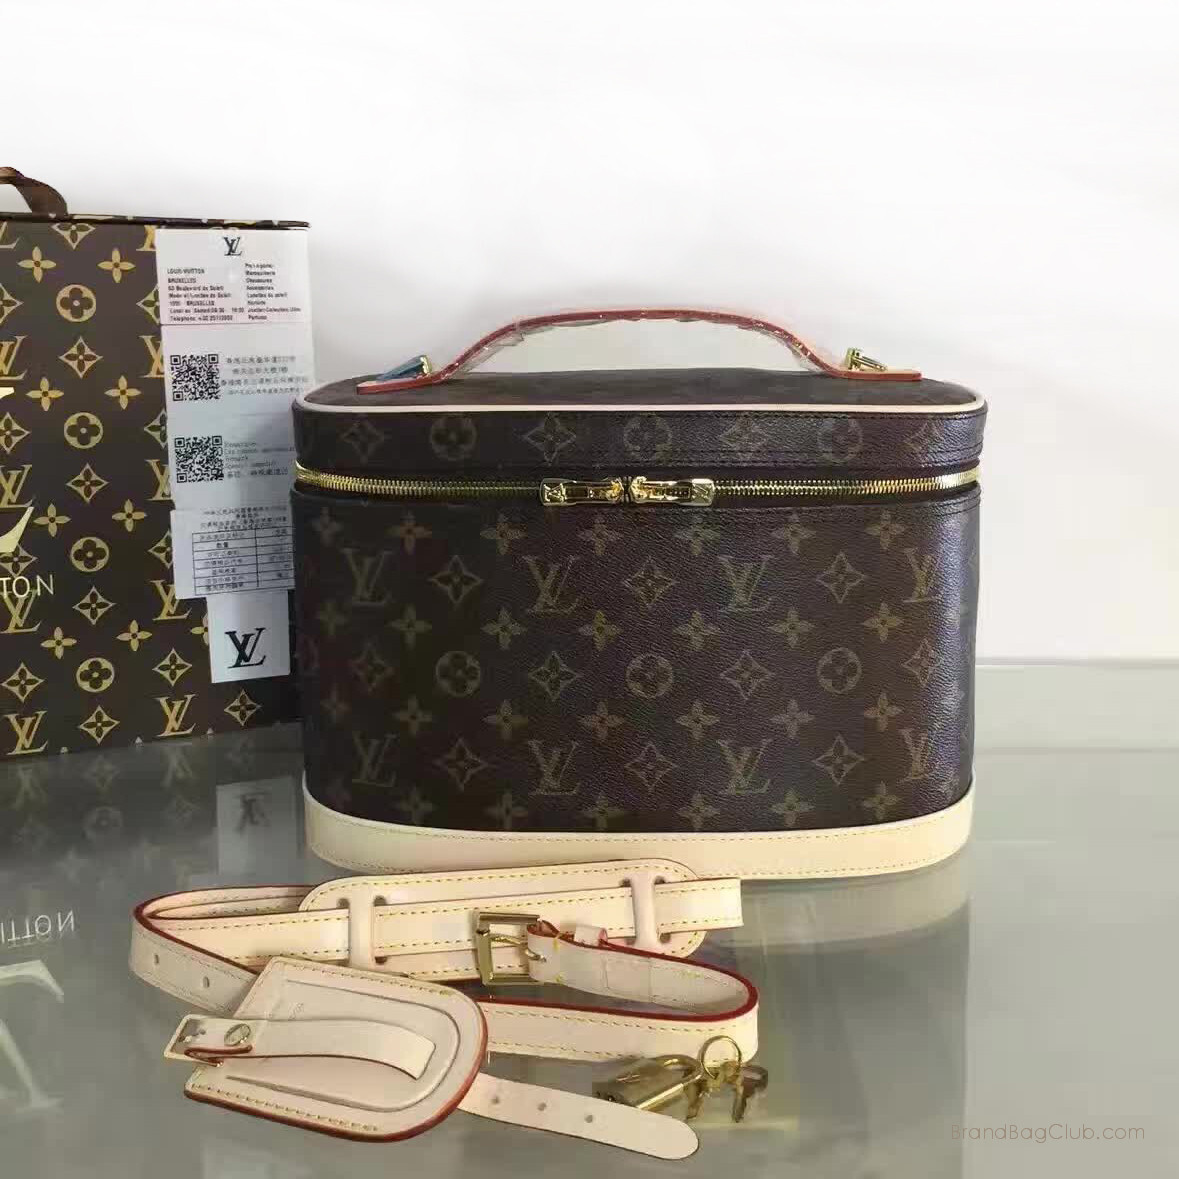 Lv Branded Makeup Bags & More